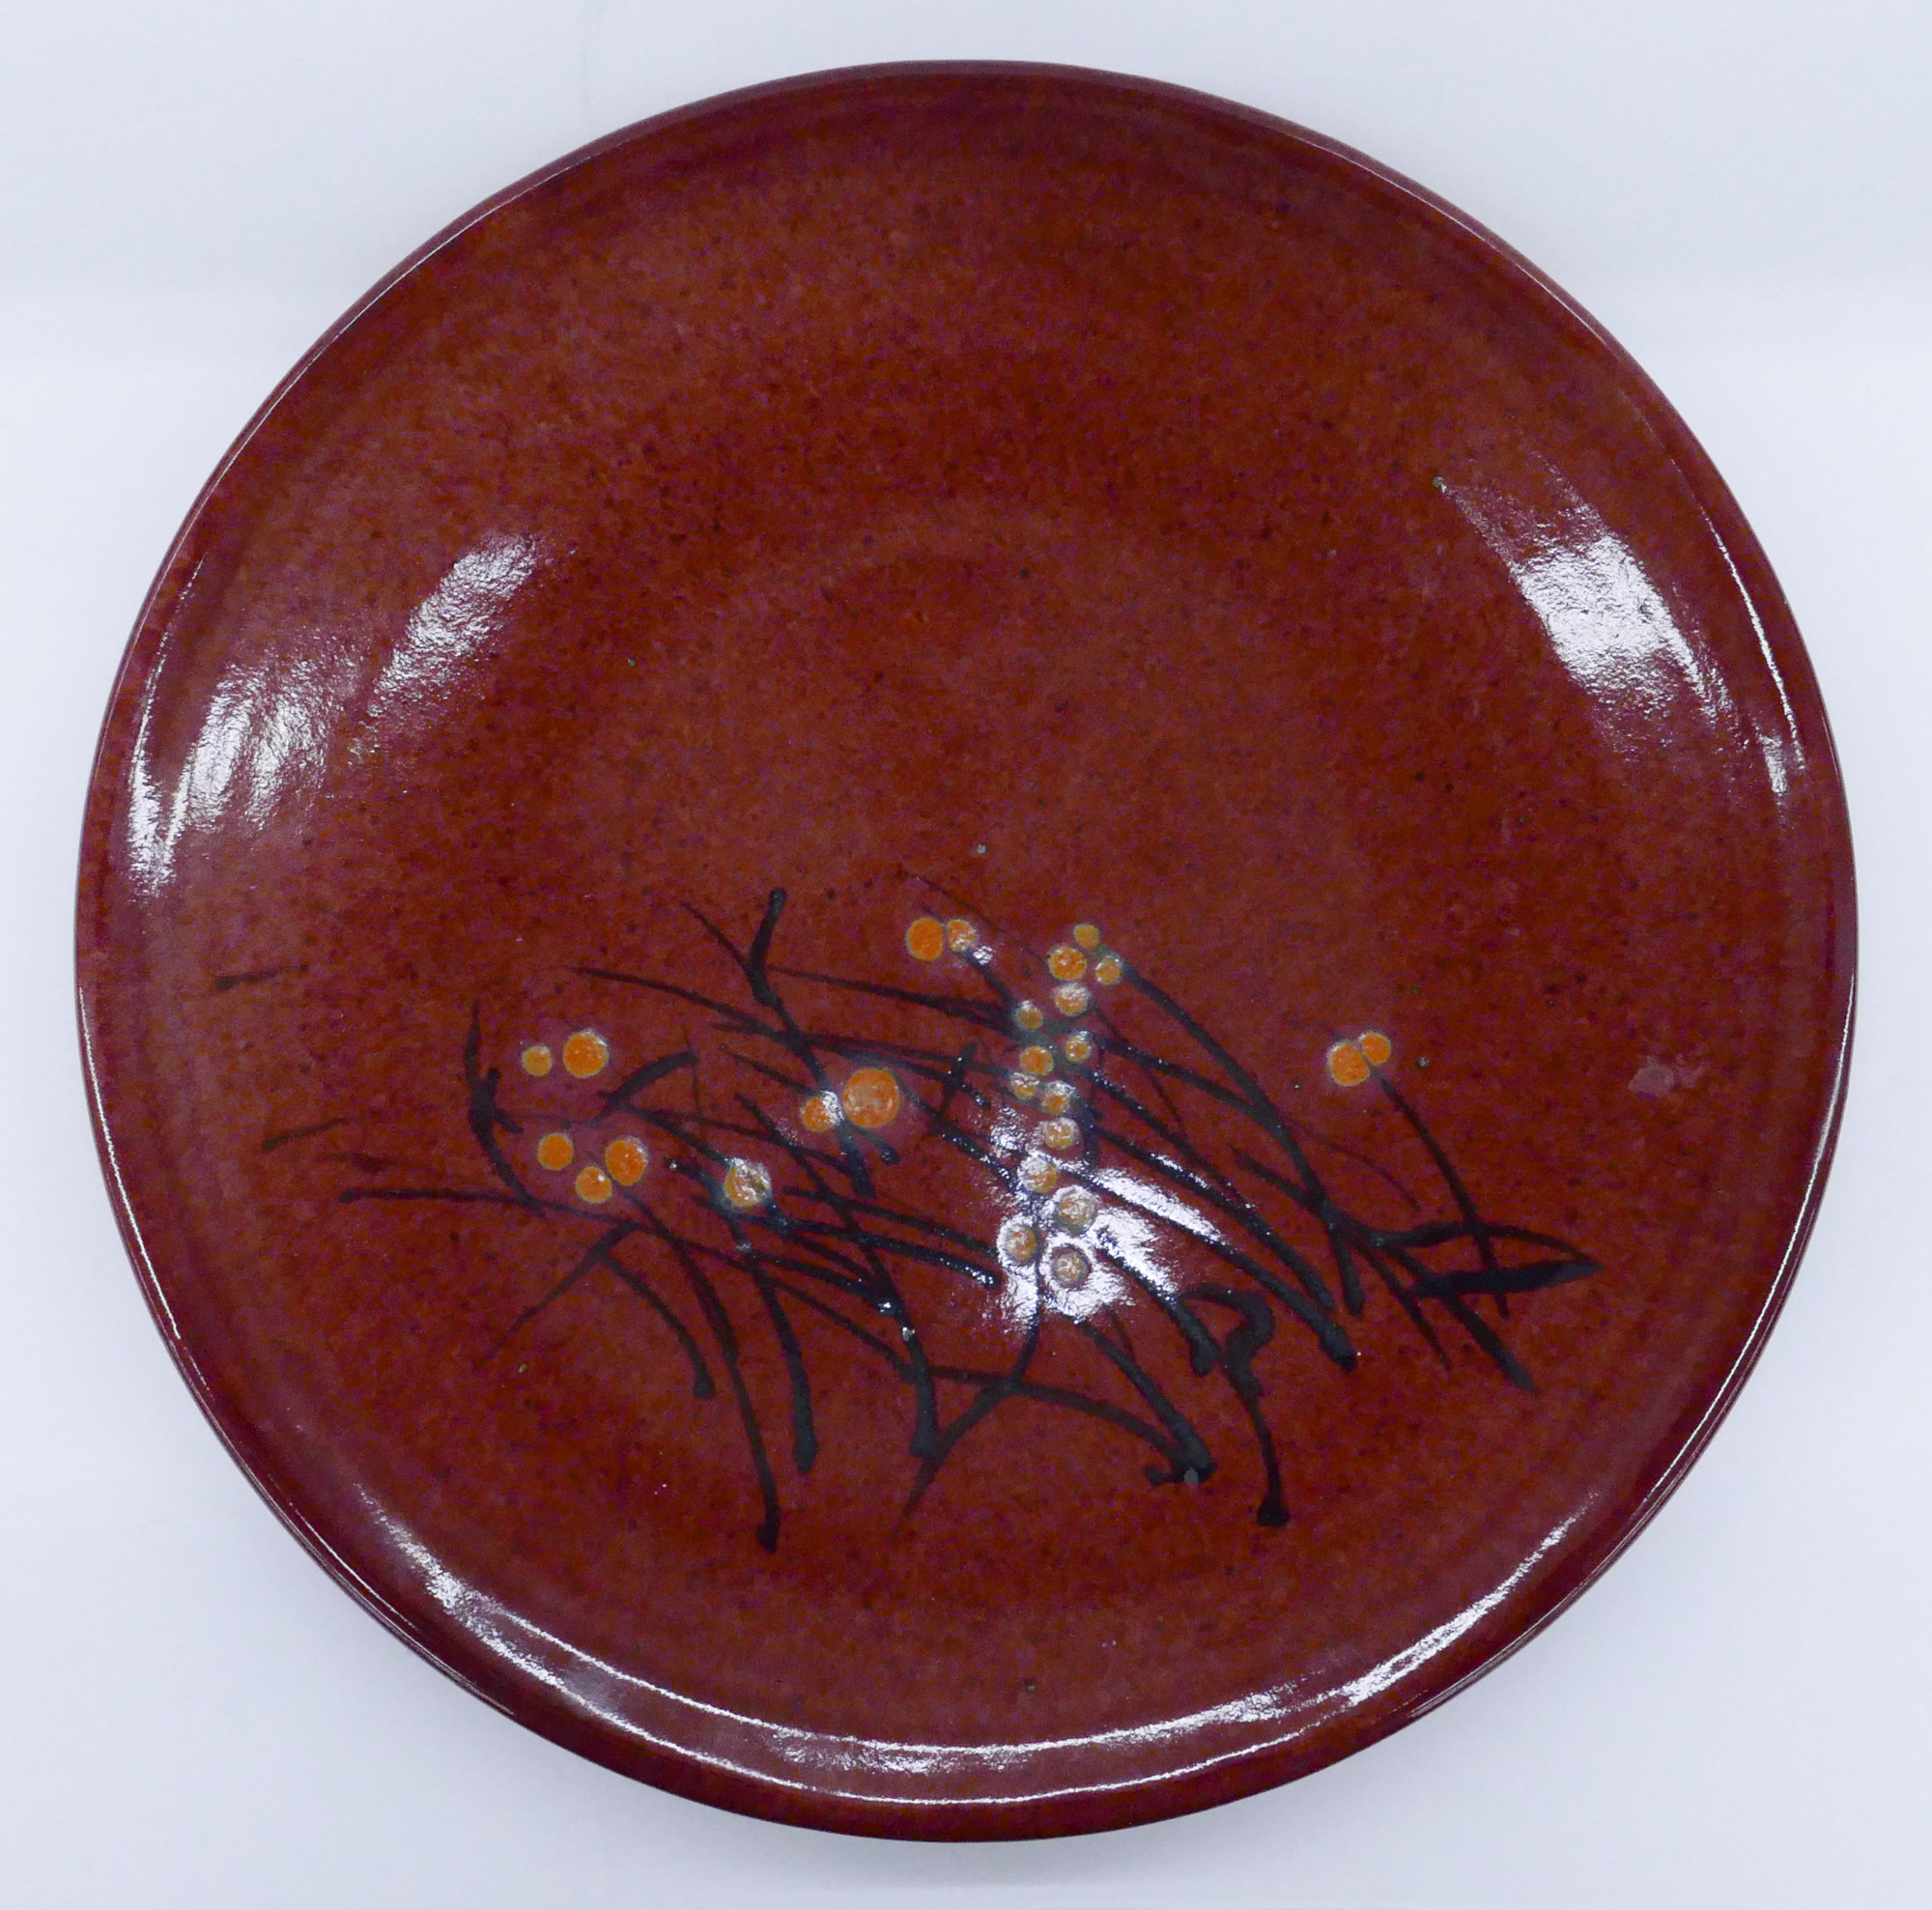 Gerald Newcomb Studio Pottery Charger 3cfc61